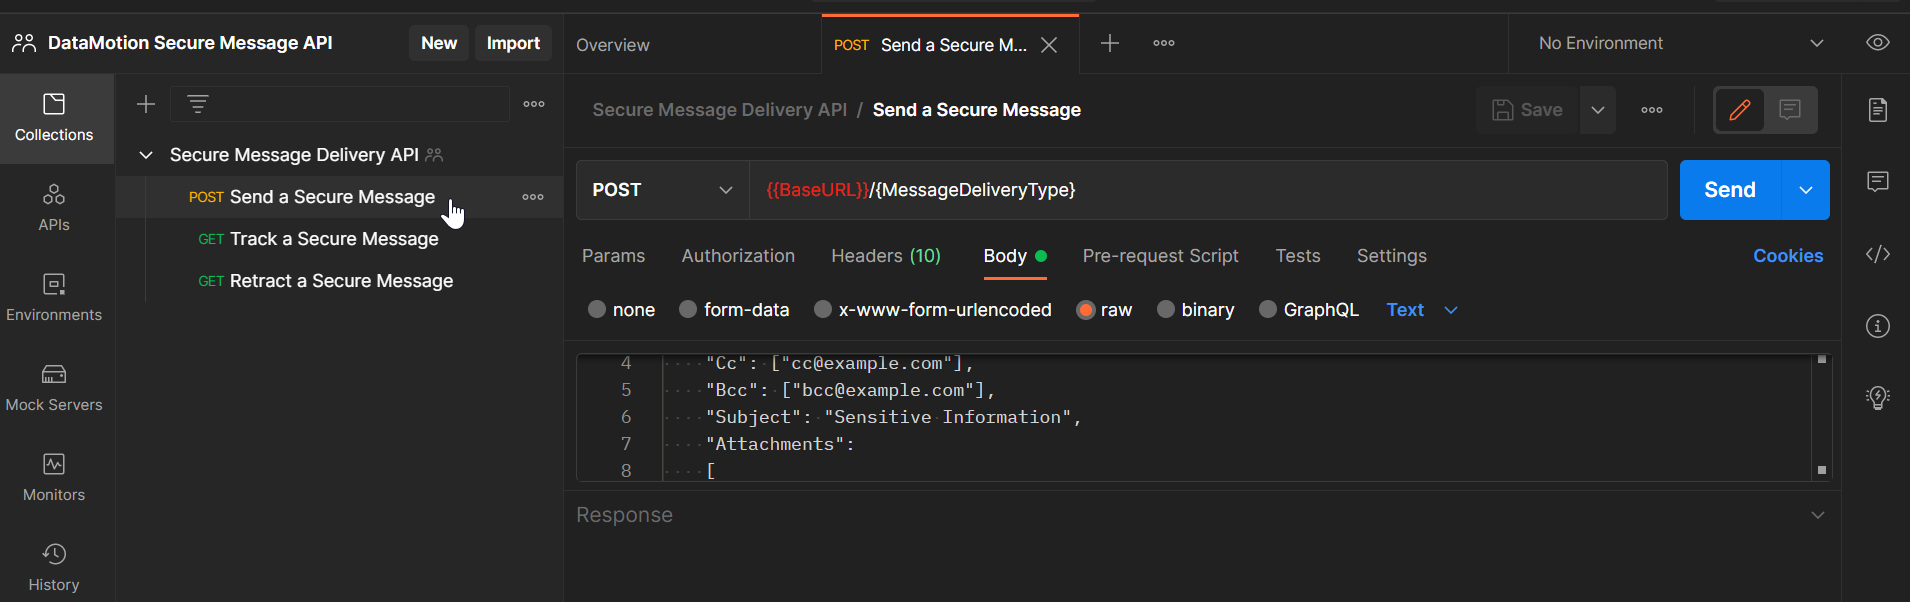 Start testing the API by selecting the 'Send a Secure Message' request